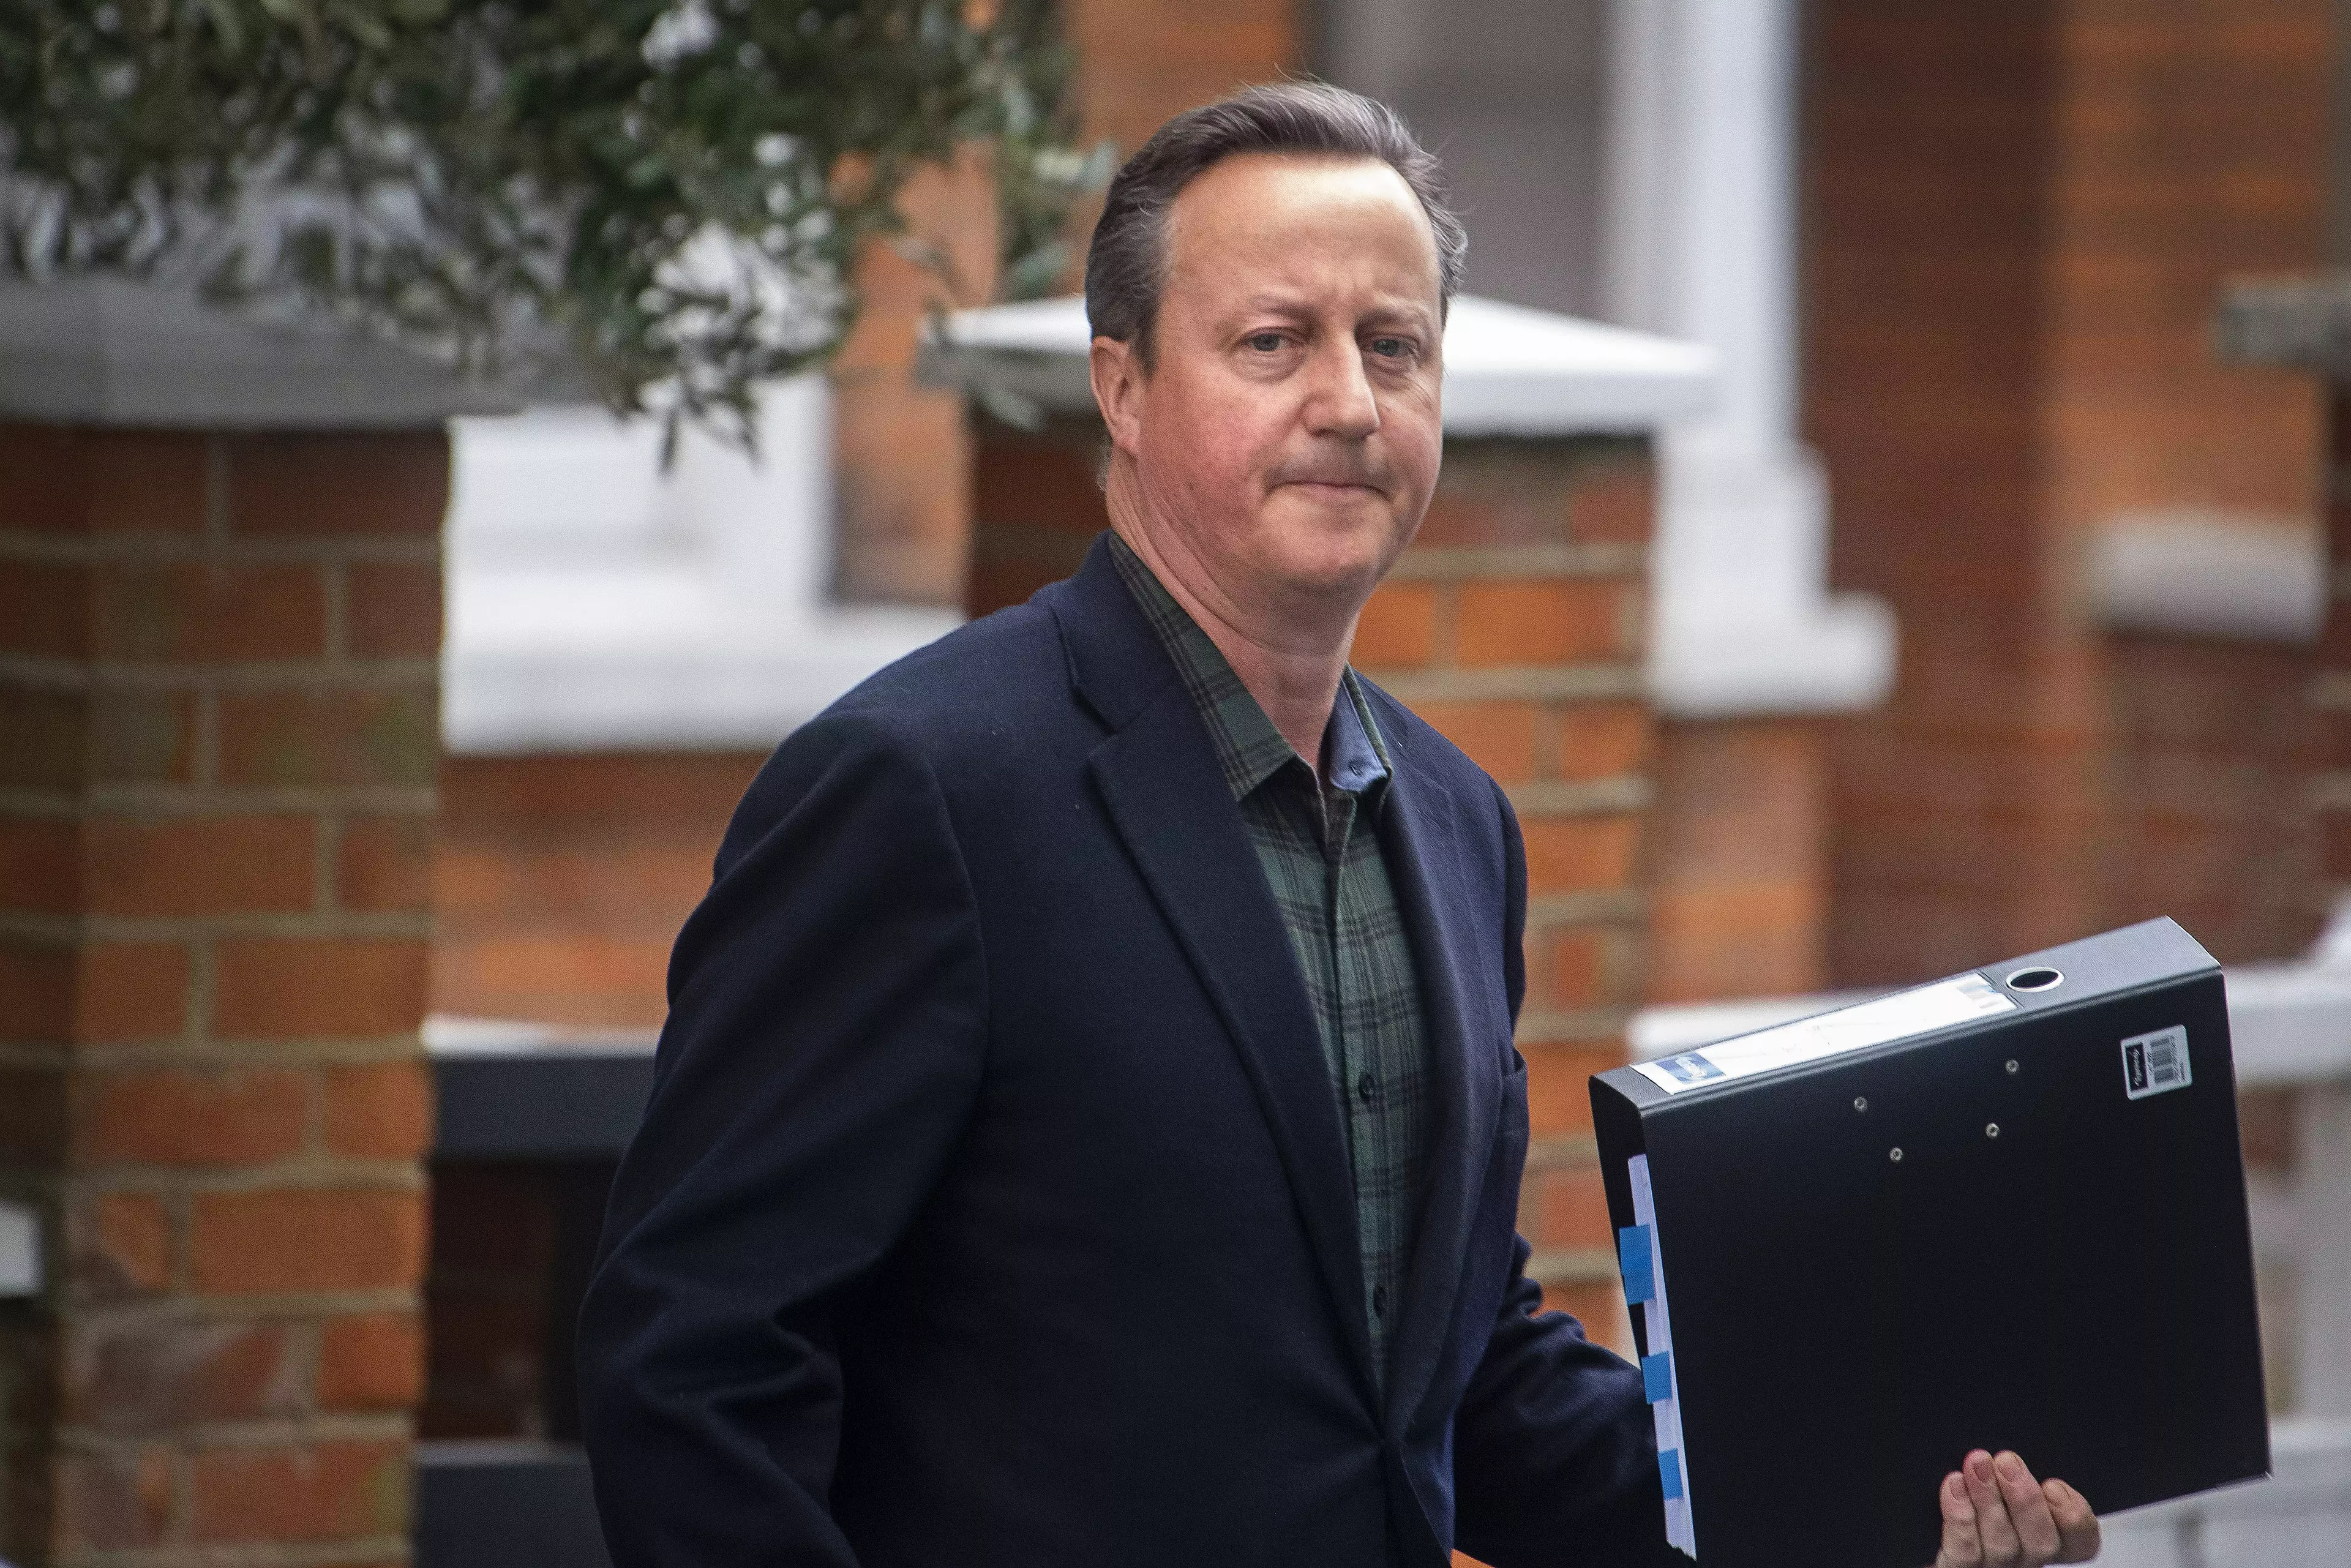 David Cameron was hauled in front of a select committee for his actions (